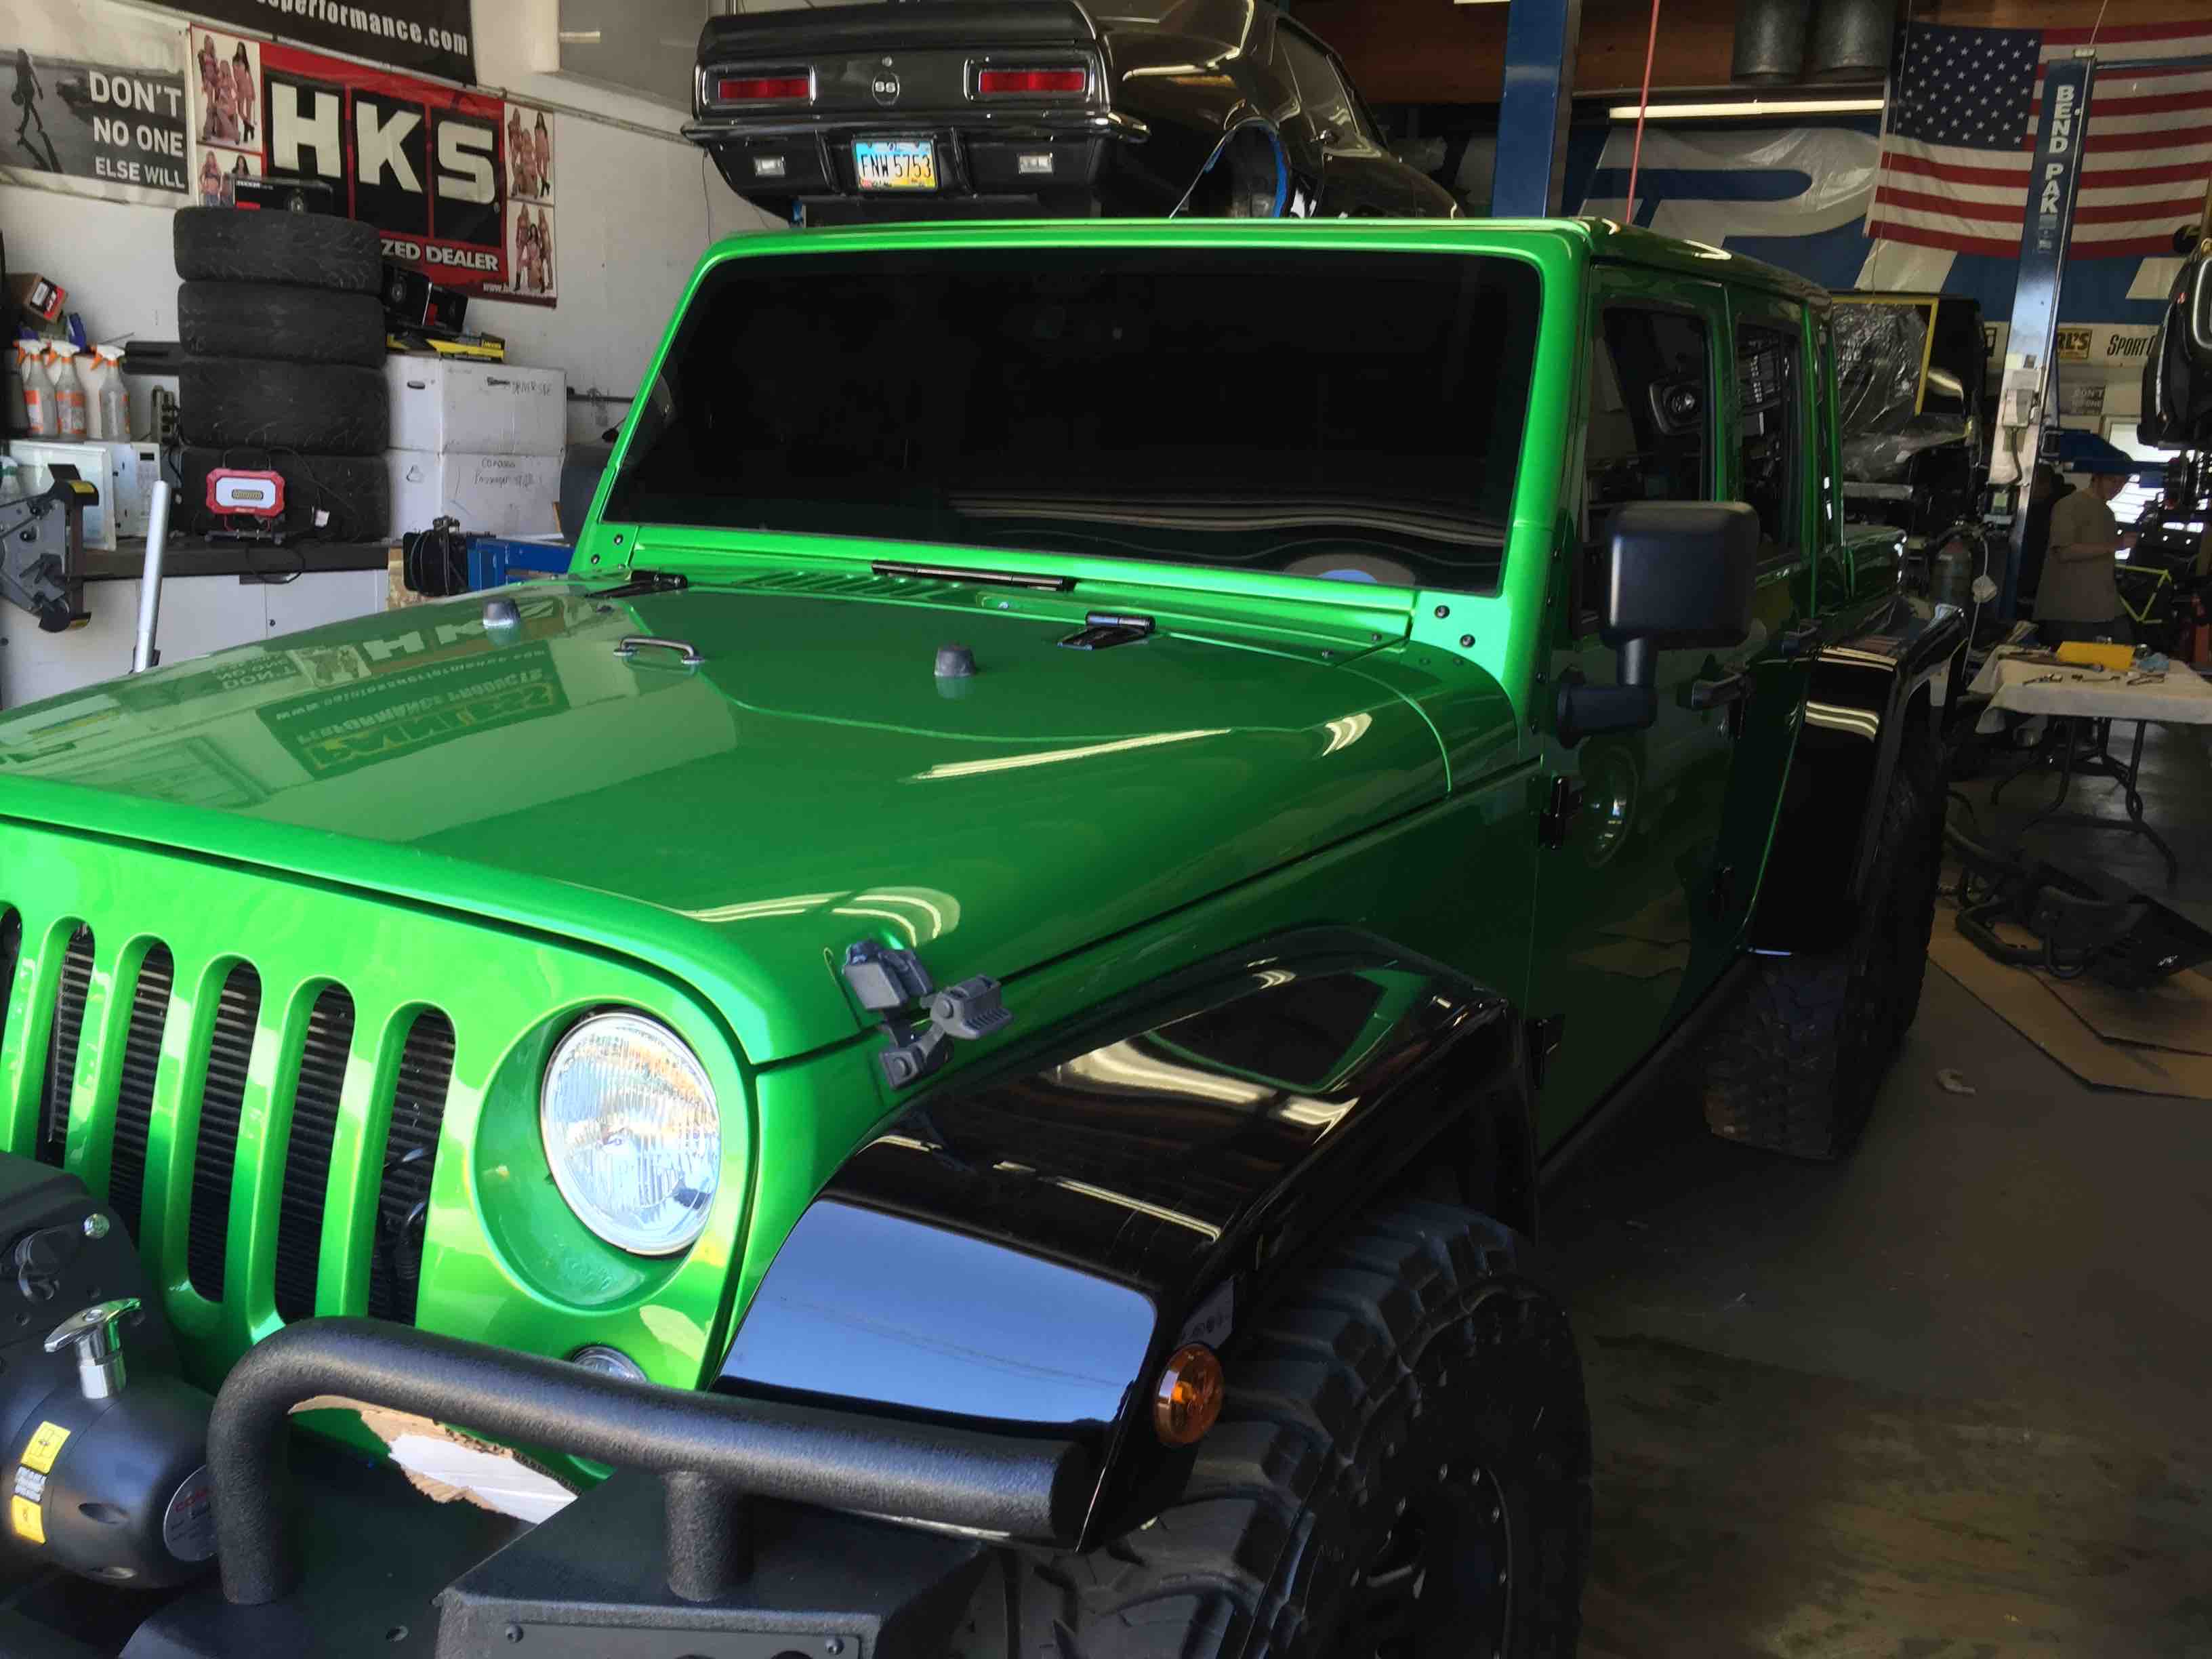 Unique 6x6 Jeep Gets Upgraded with Llumar ATC Window Tint 2 - Sundial  Window Tinting